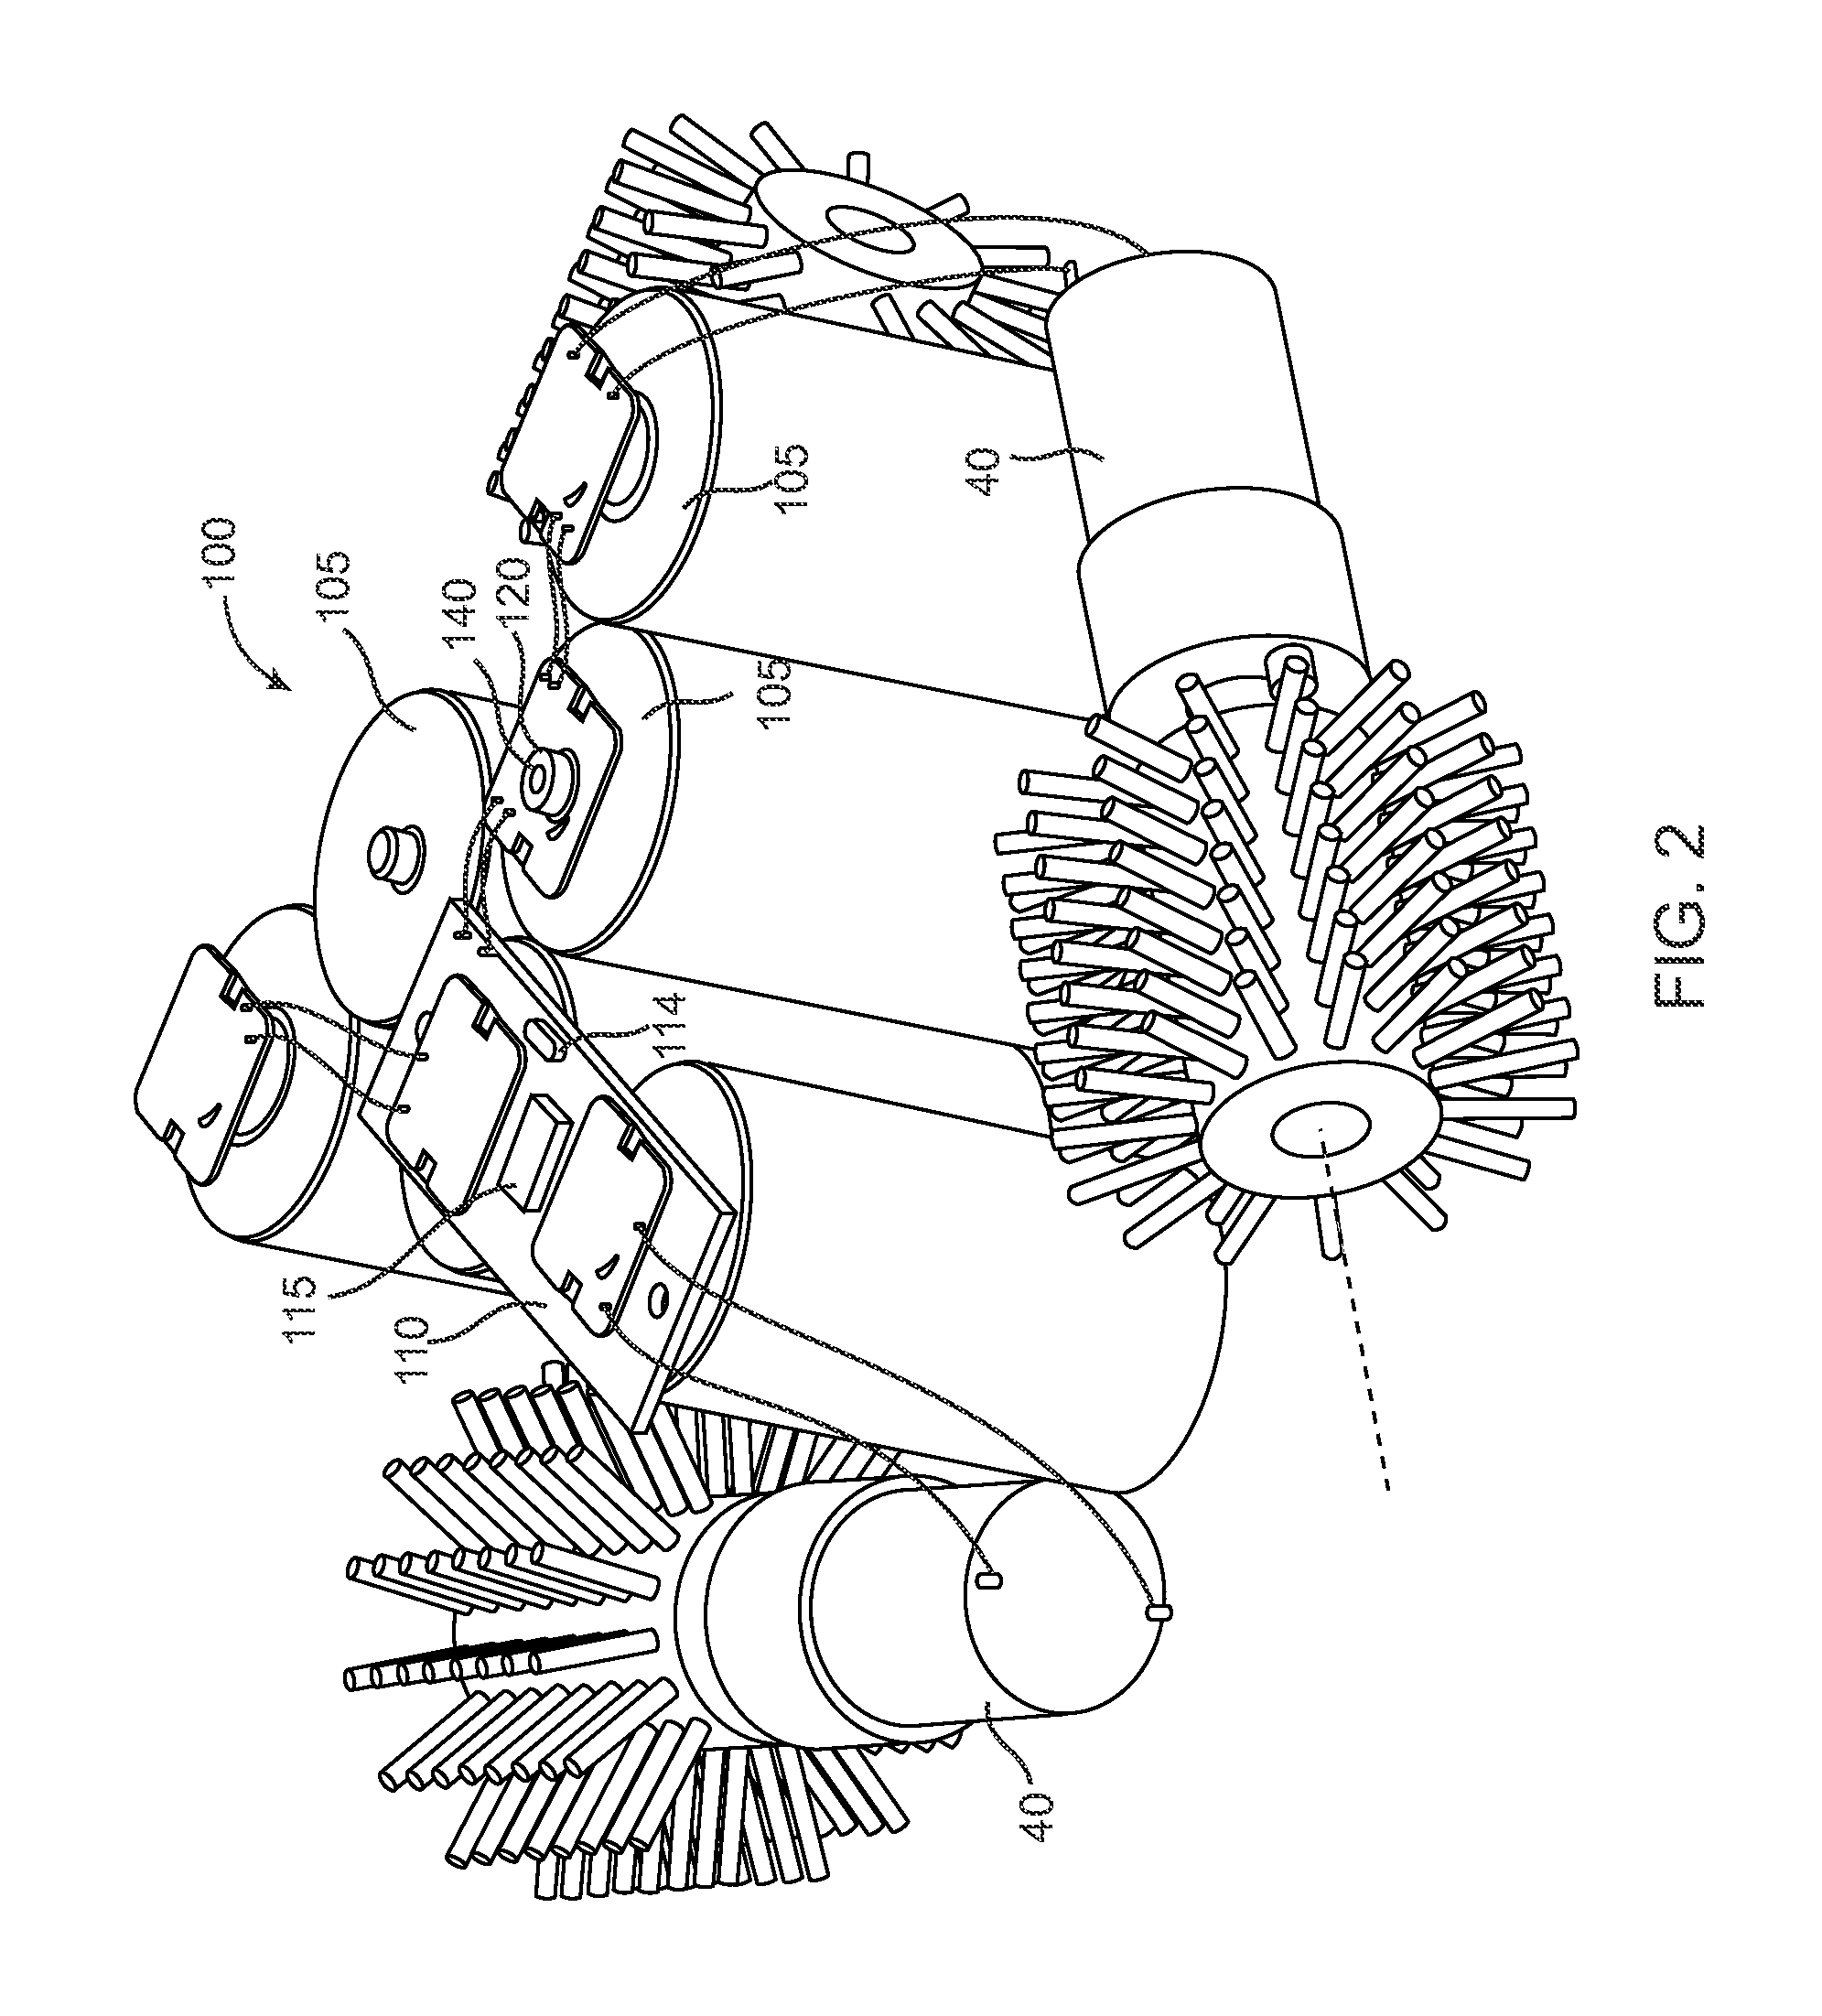 Surface-cleaning device